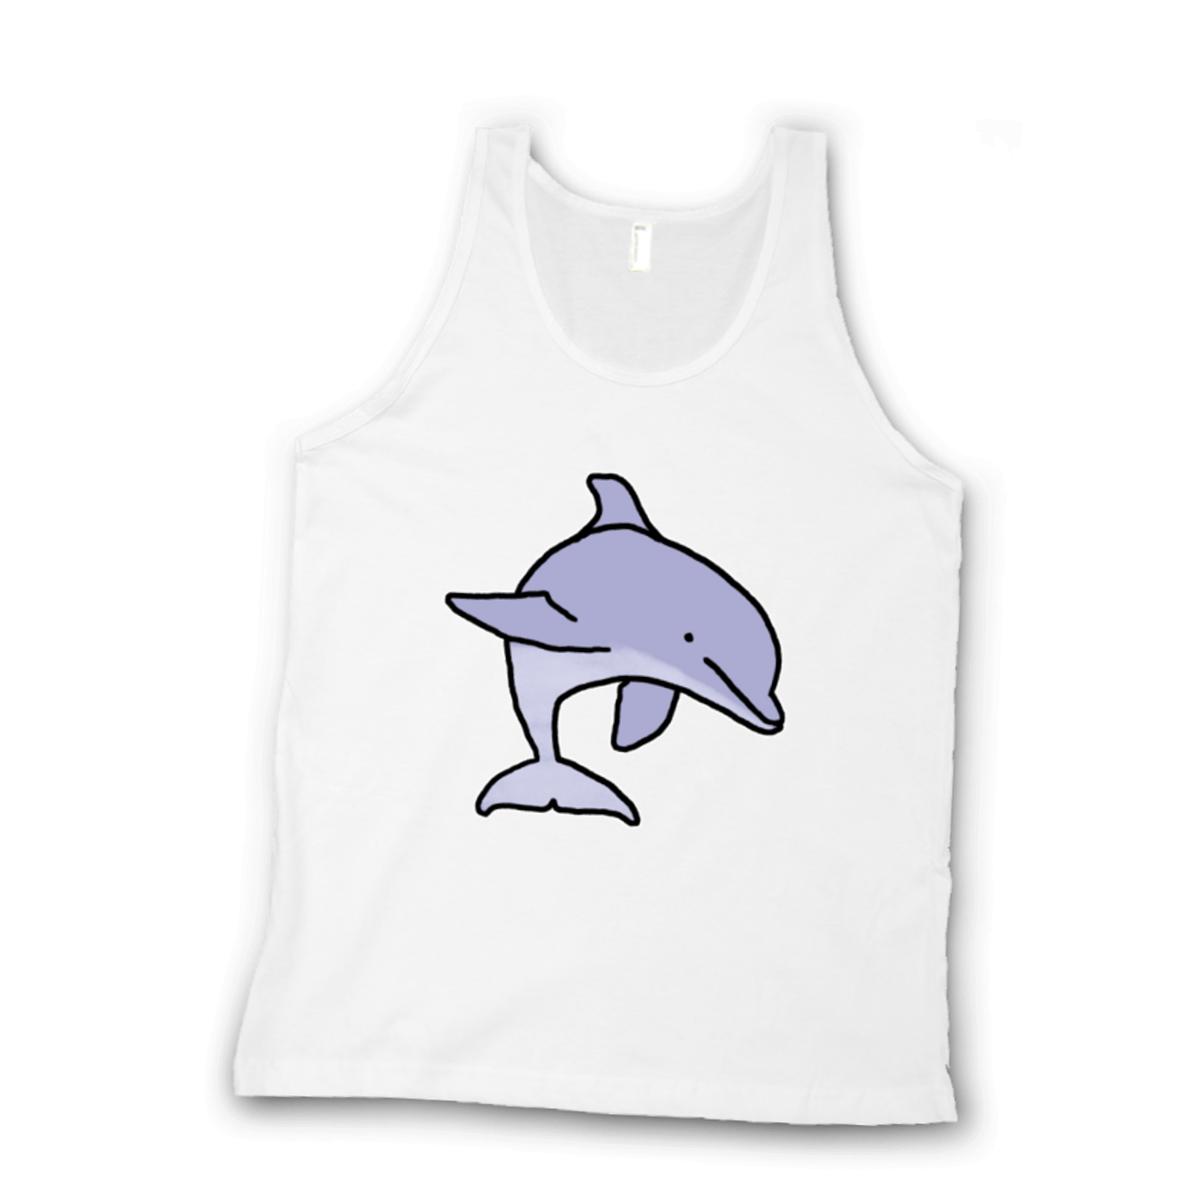 Dolphin Unisex Tank Top Small white